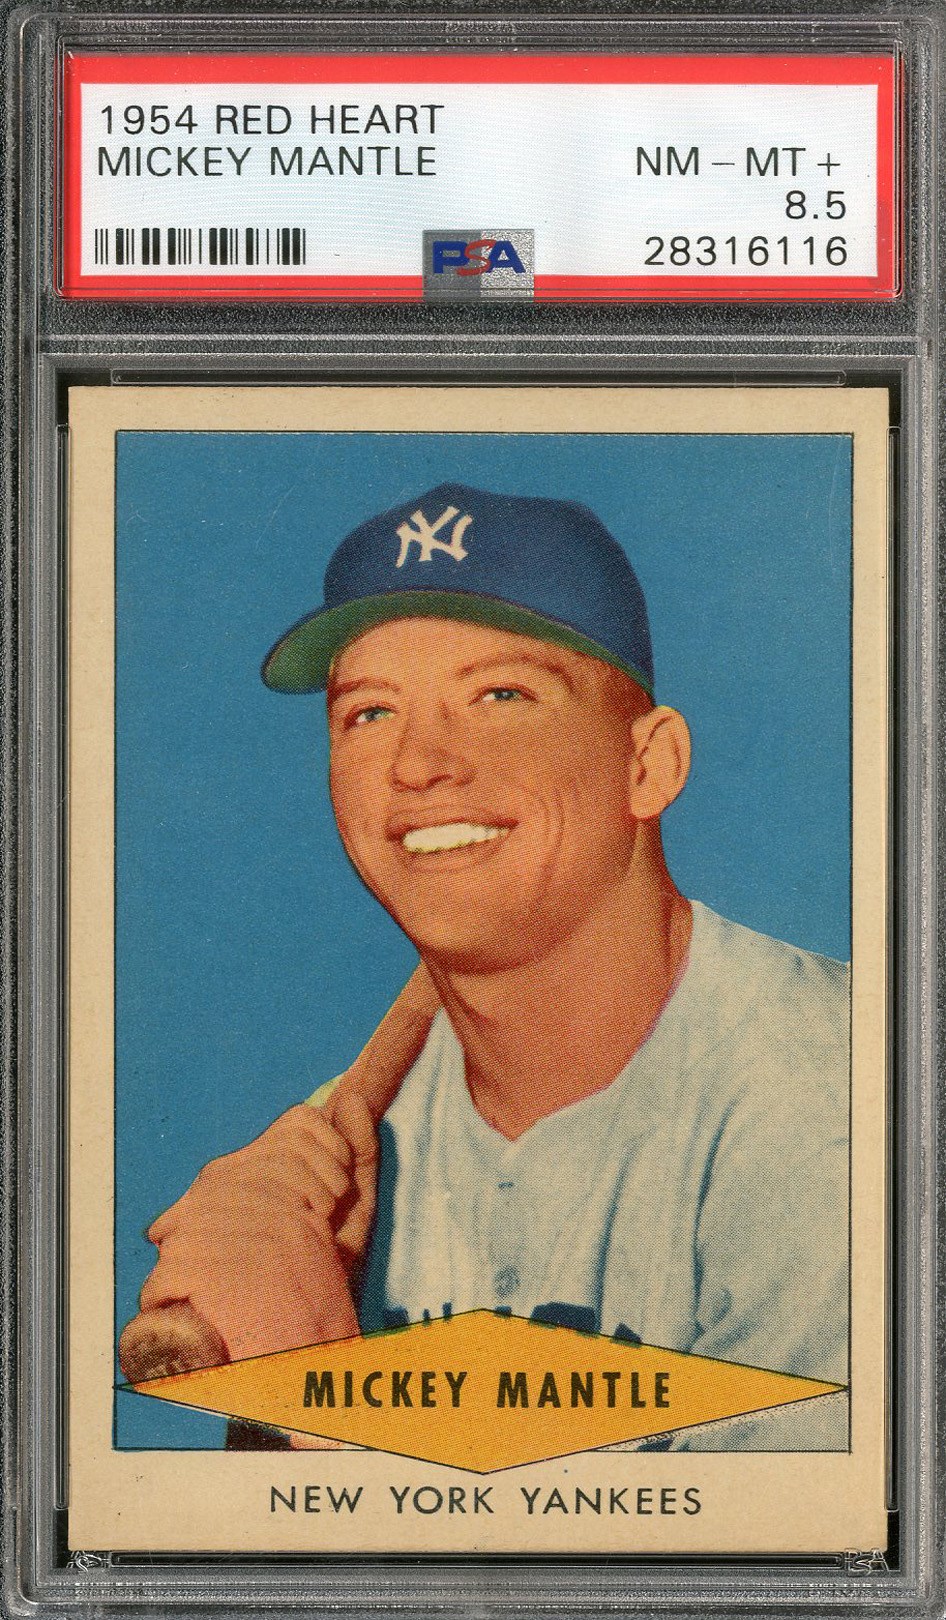 Baseball and Trading Cards - 1954 Red Heart Mickey Mantle - PSA NM-MT+ 8.5